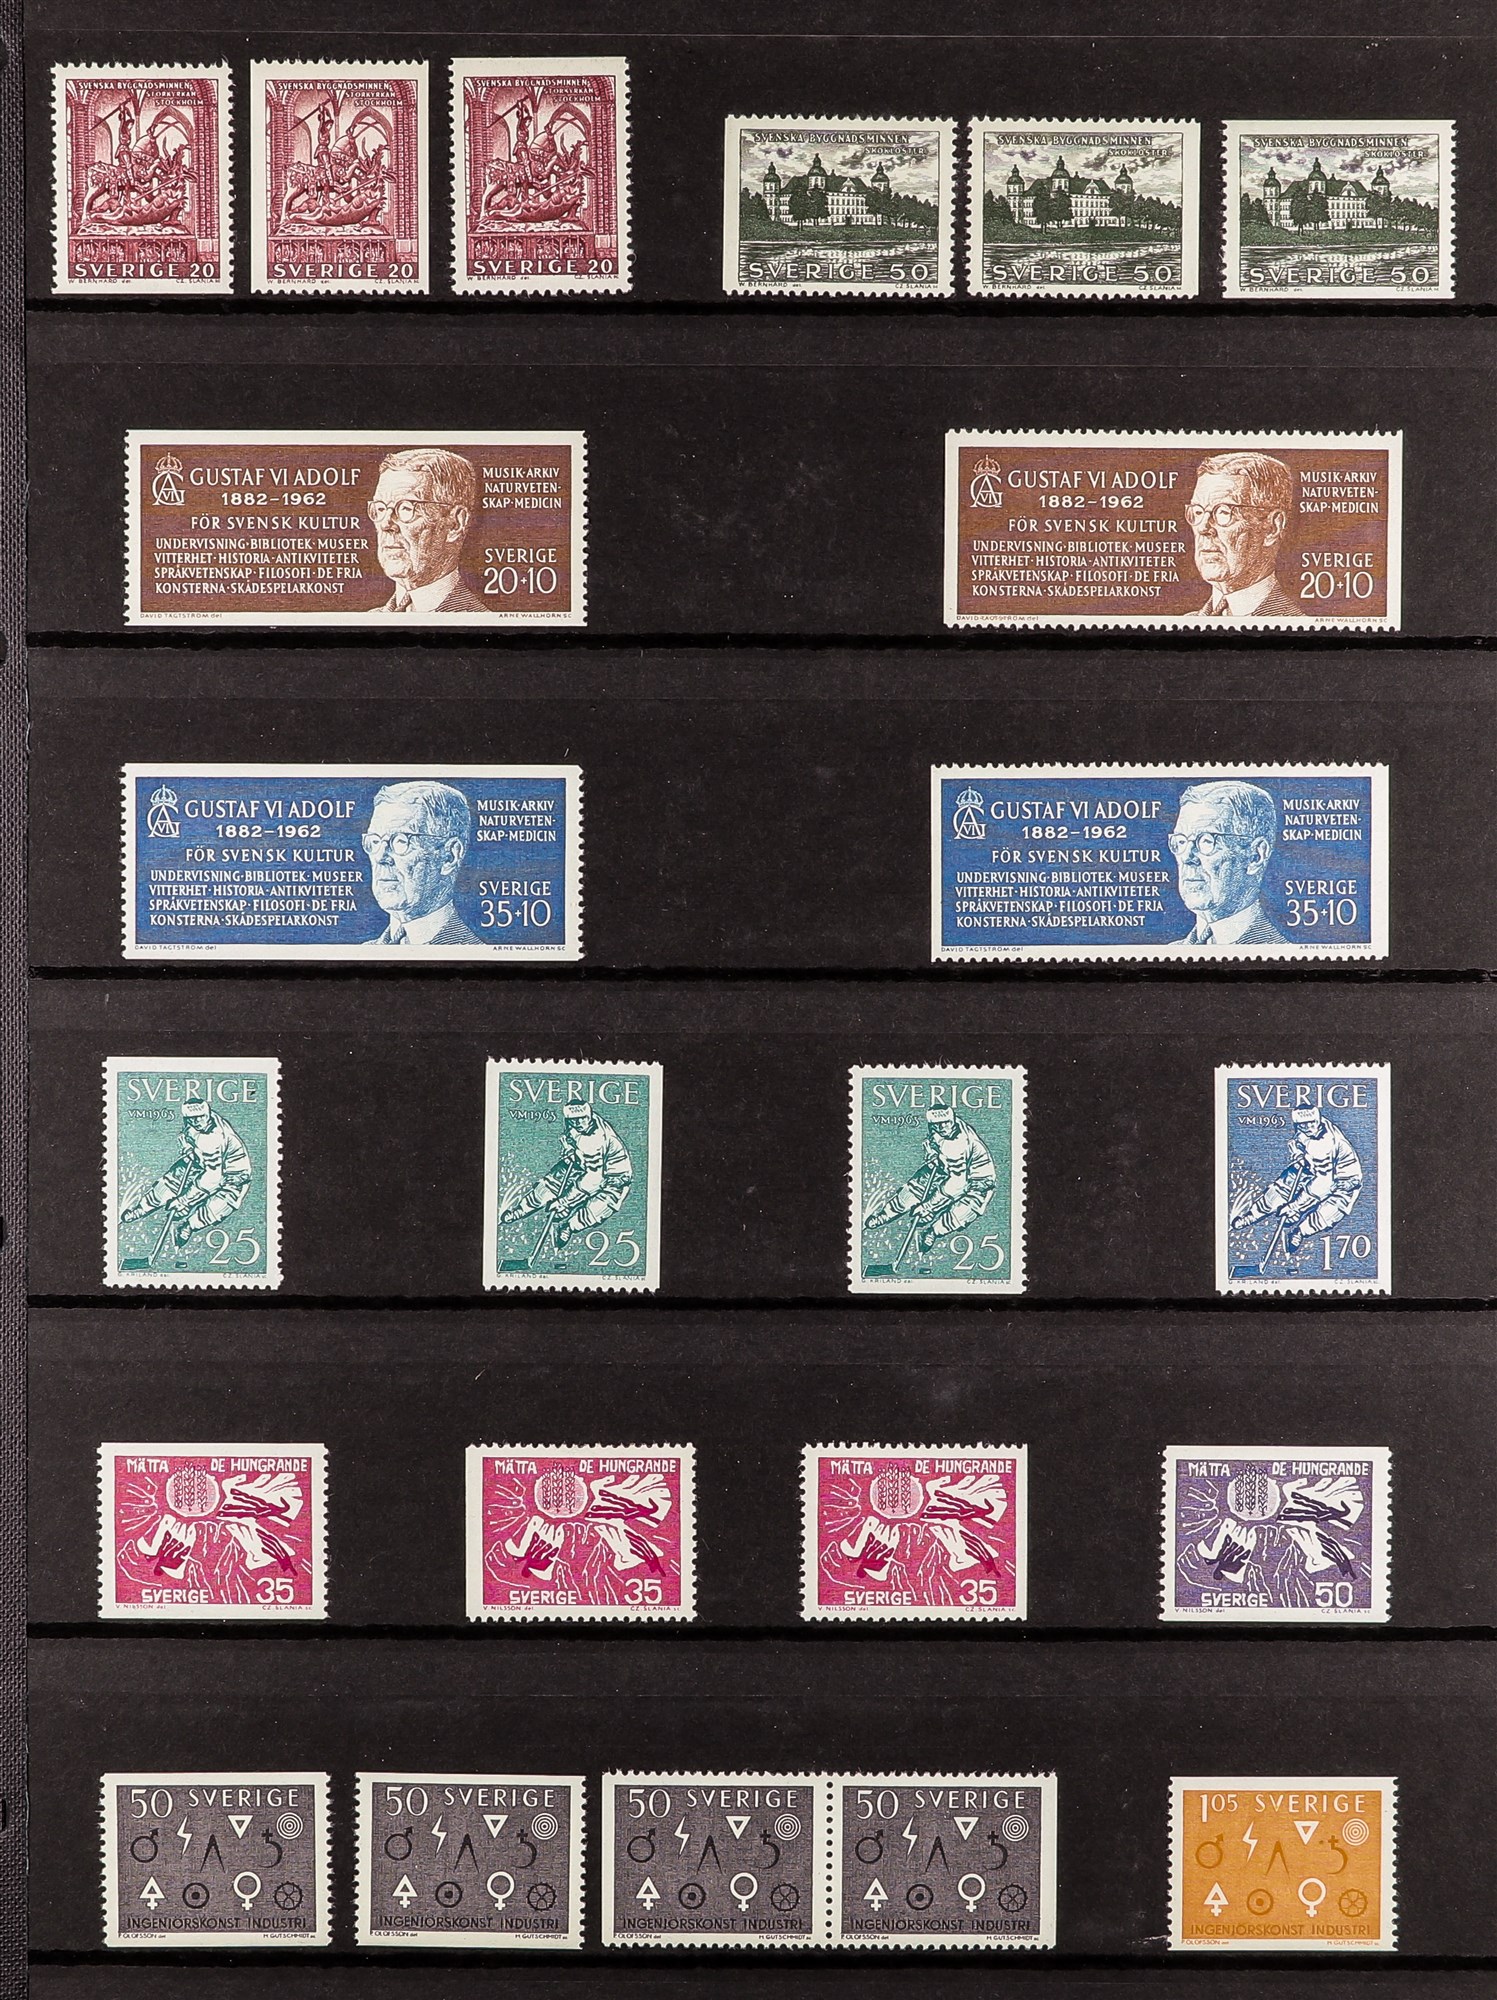 SWEDEN 1957-81 NEVER HINGED MINT COLLECTION with various perforation types, se-tenant issues, 1981 - Image 2 of 6